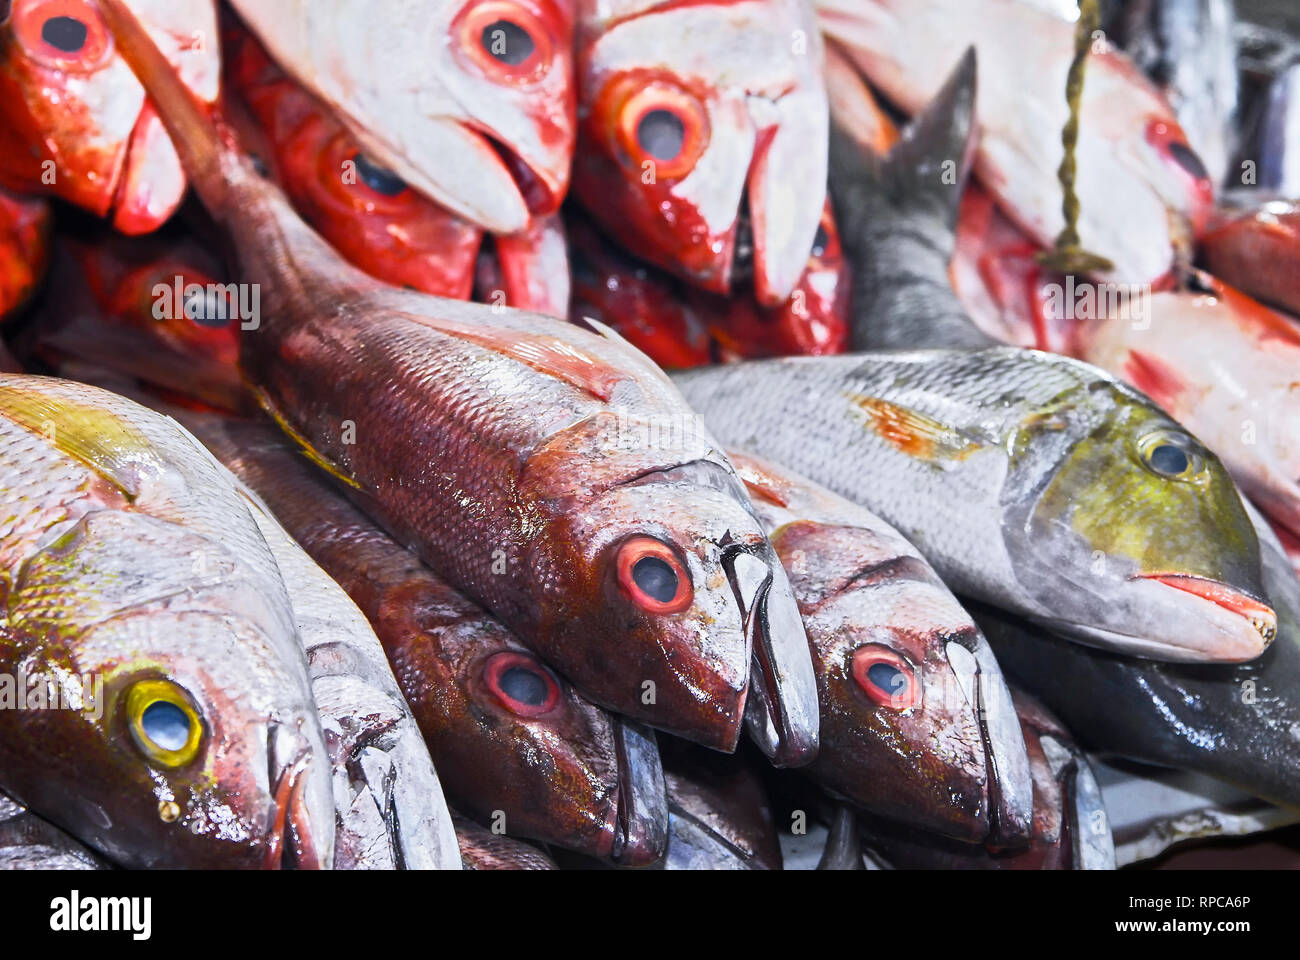 Mixed array of grouper fish, red snapper, coral fish laying for sale on a tray at the Central Market in Puerto Princesa City, Palawan, Philippines Stock Photo